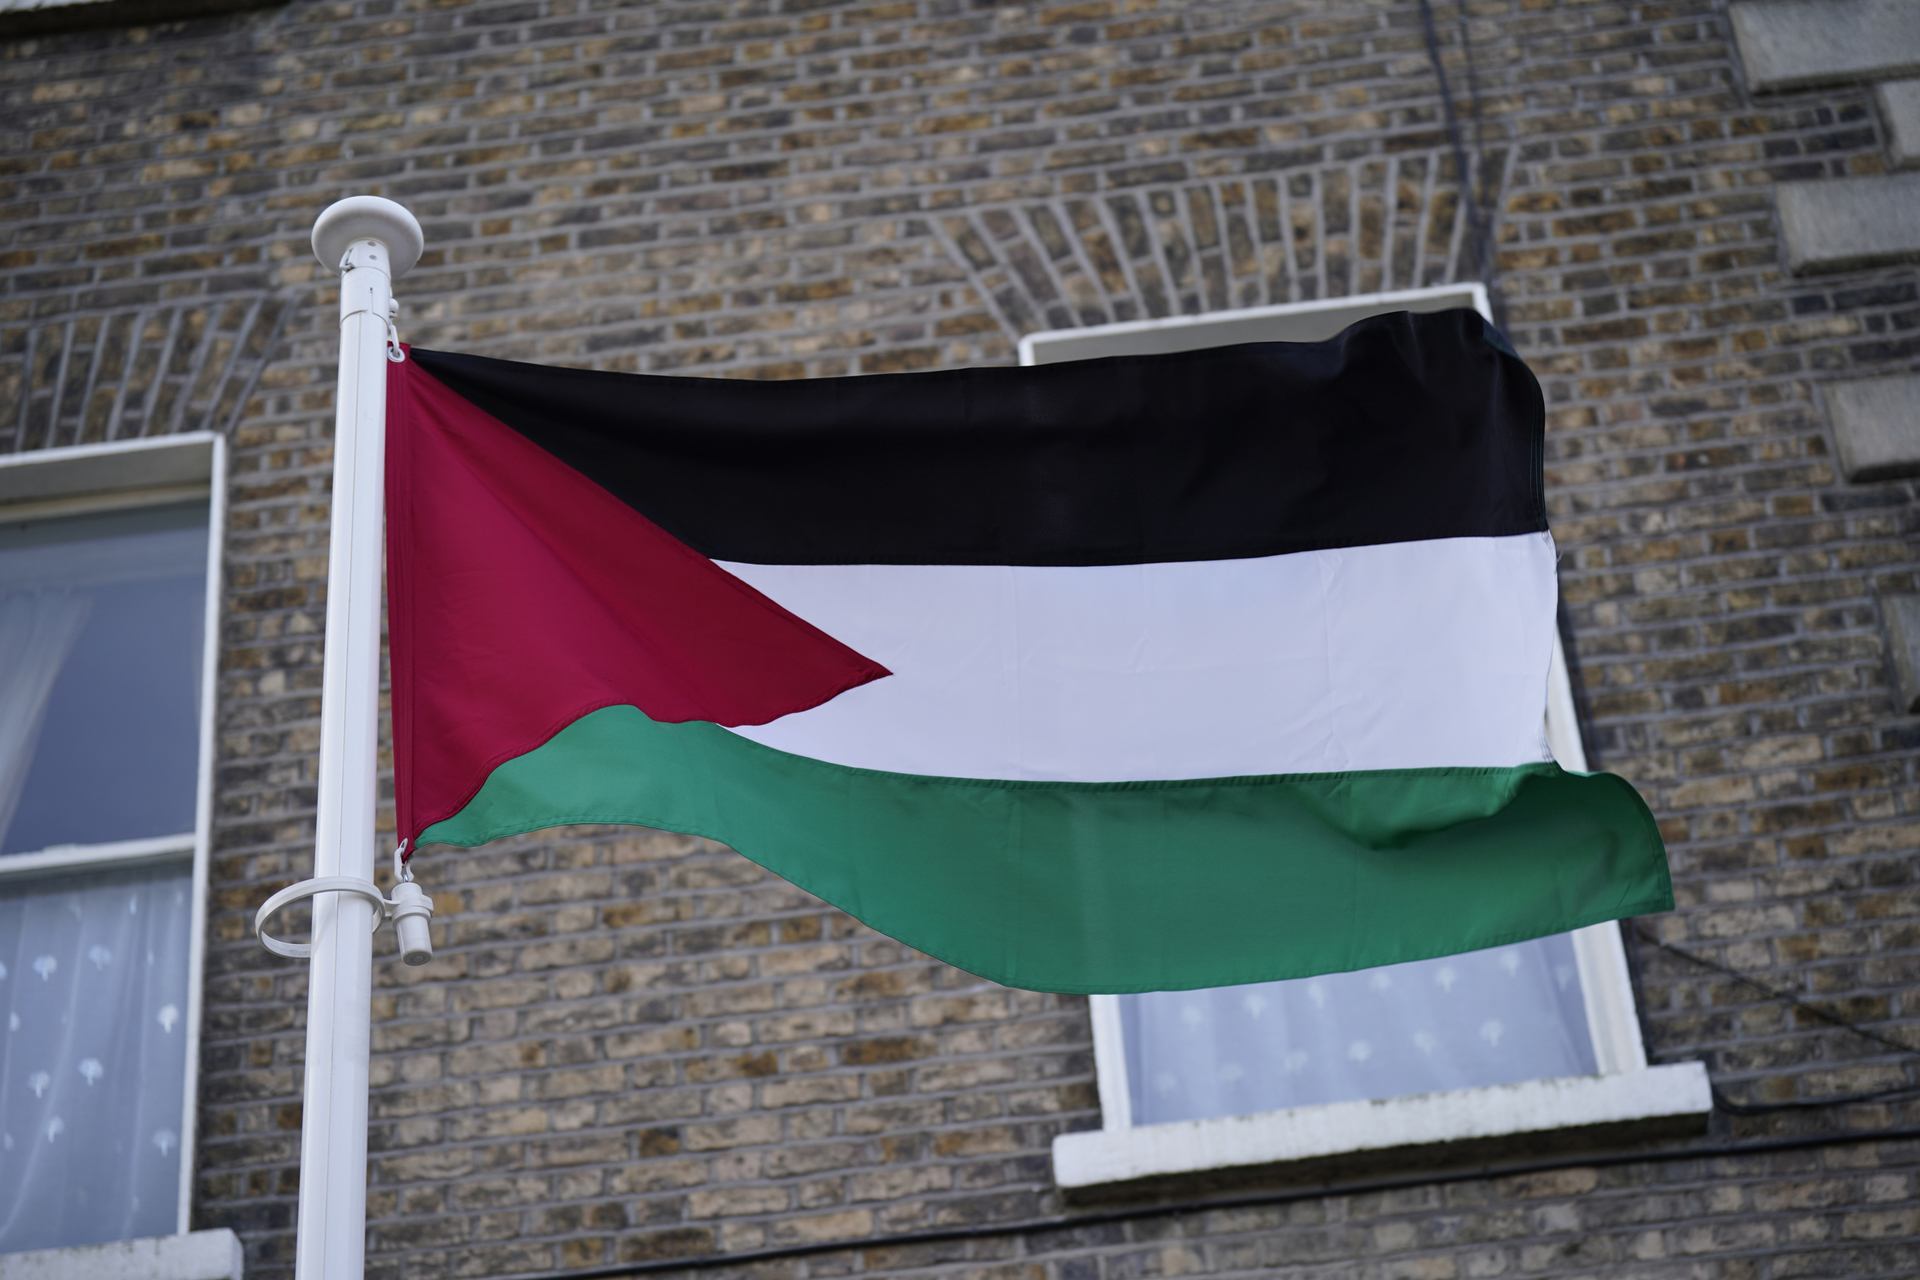 A view of the Palestinian flag flying outside the Palestinian Embassy in Dublin.